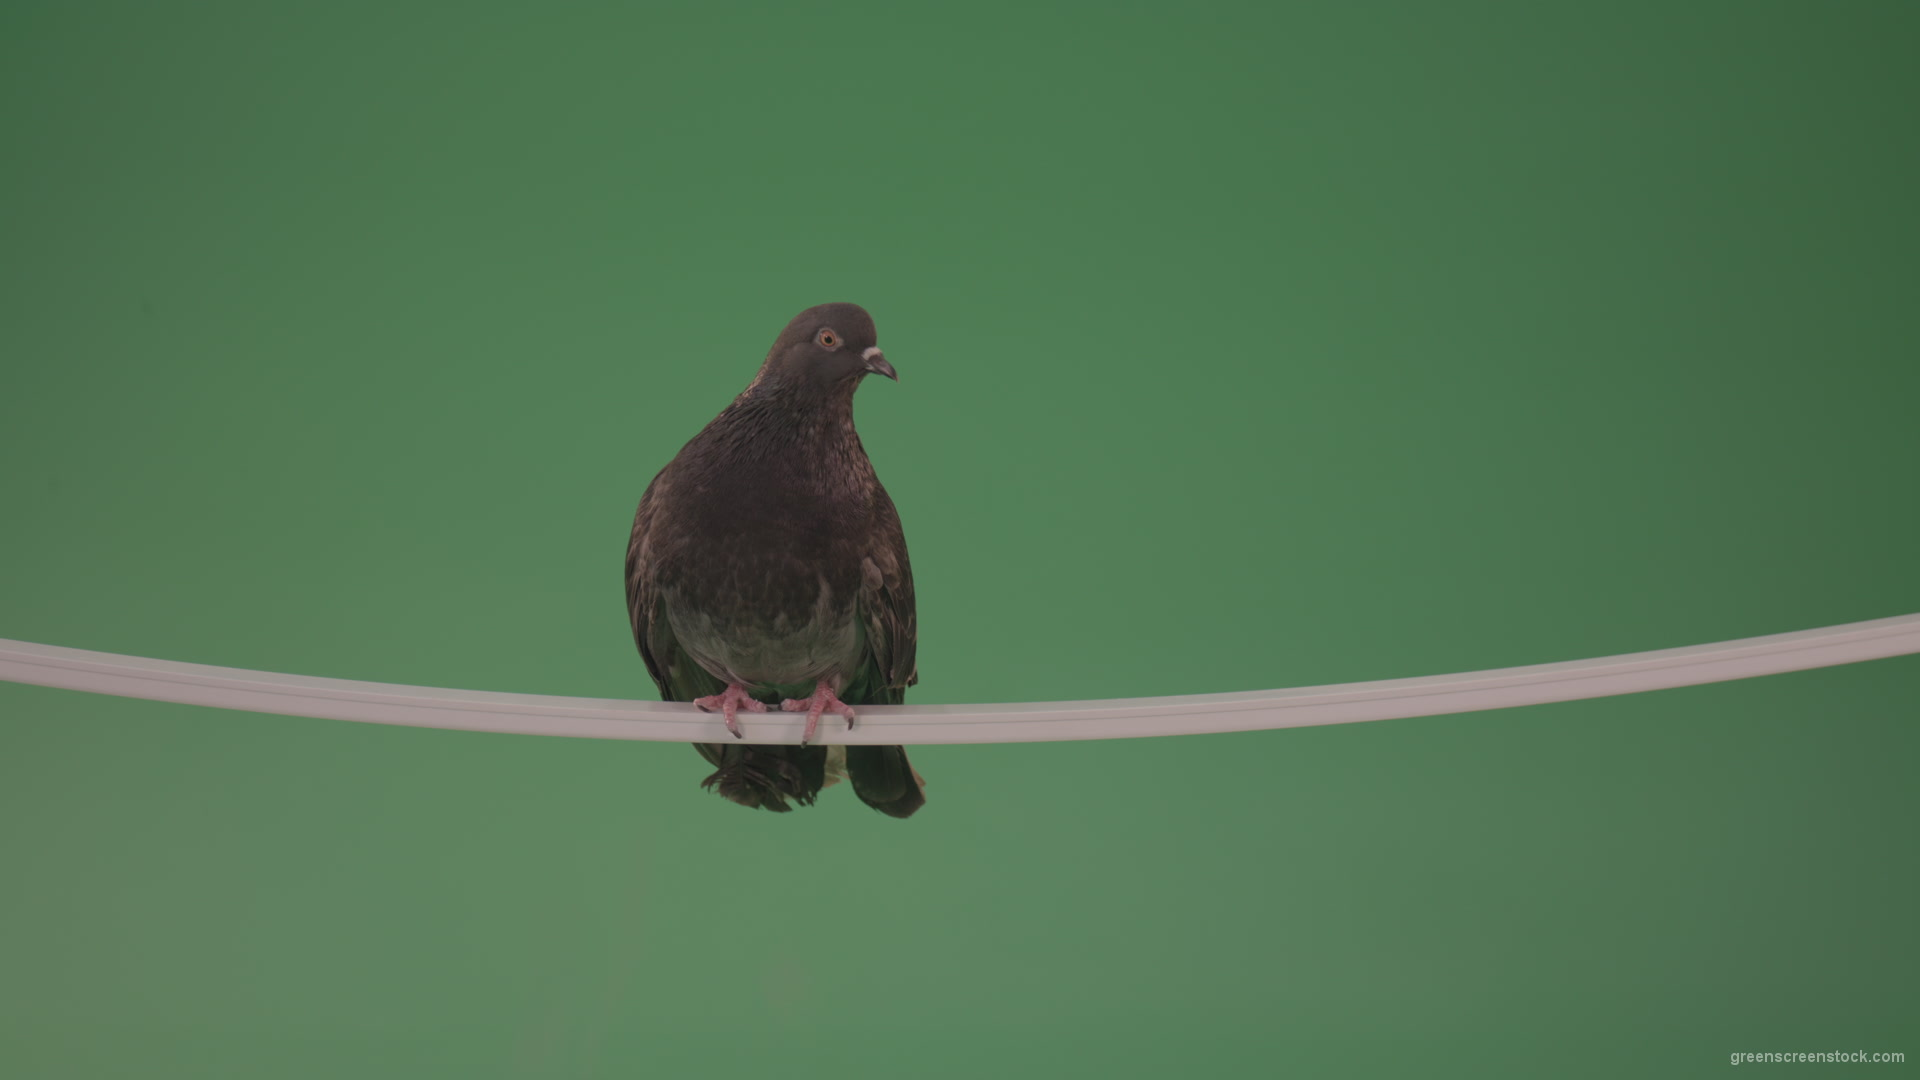 Sitting-bird-doves-on-a-pipe-in-a-big-city-isolated-on-chromakey-background_001 Green Screen Stock